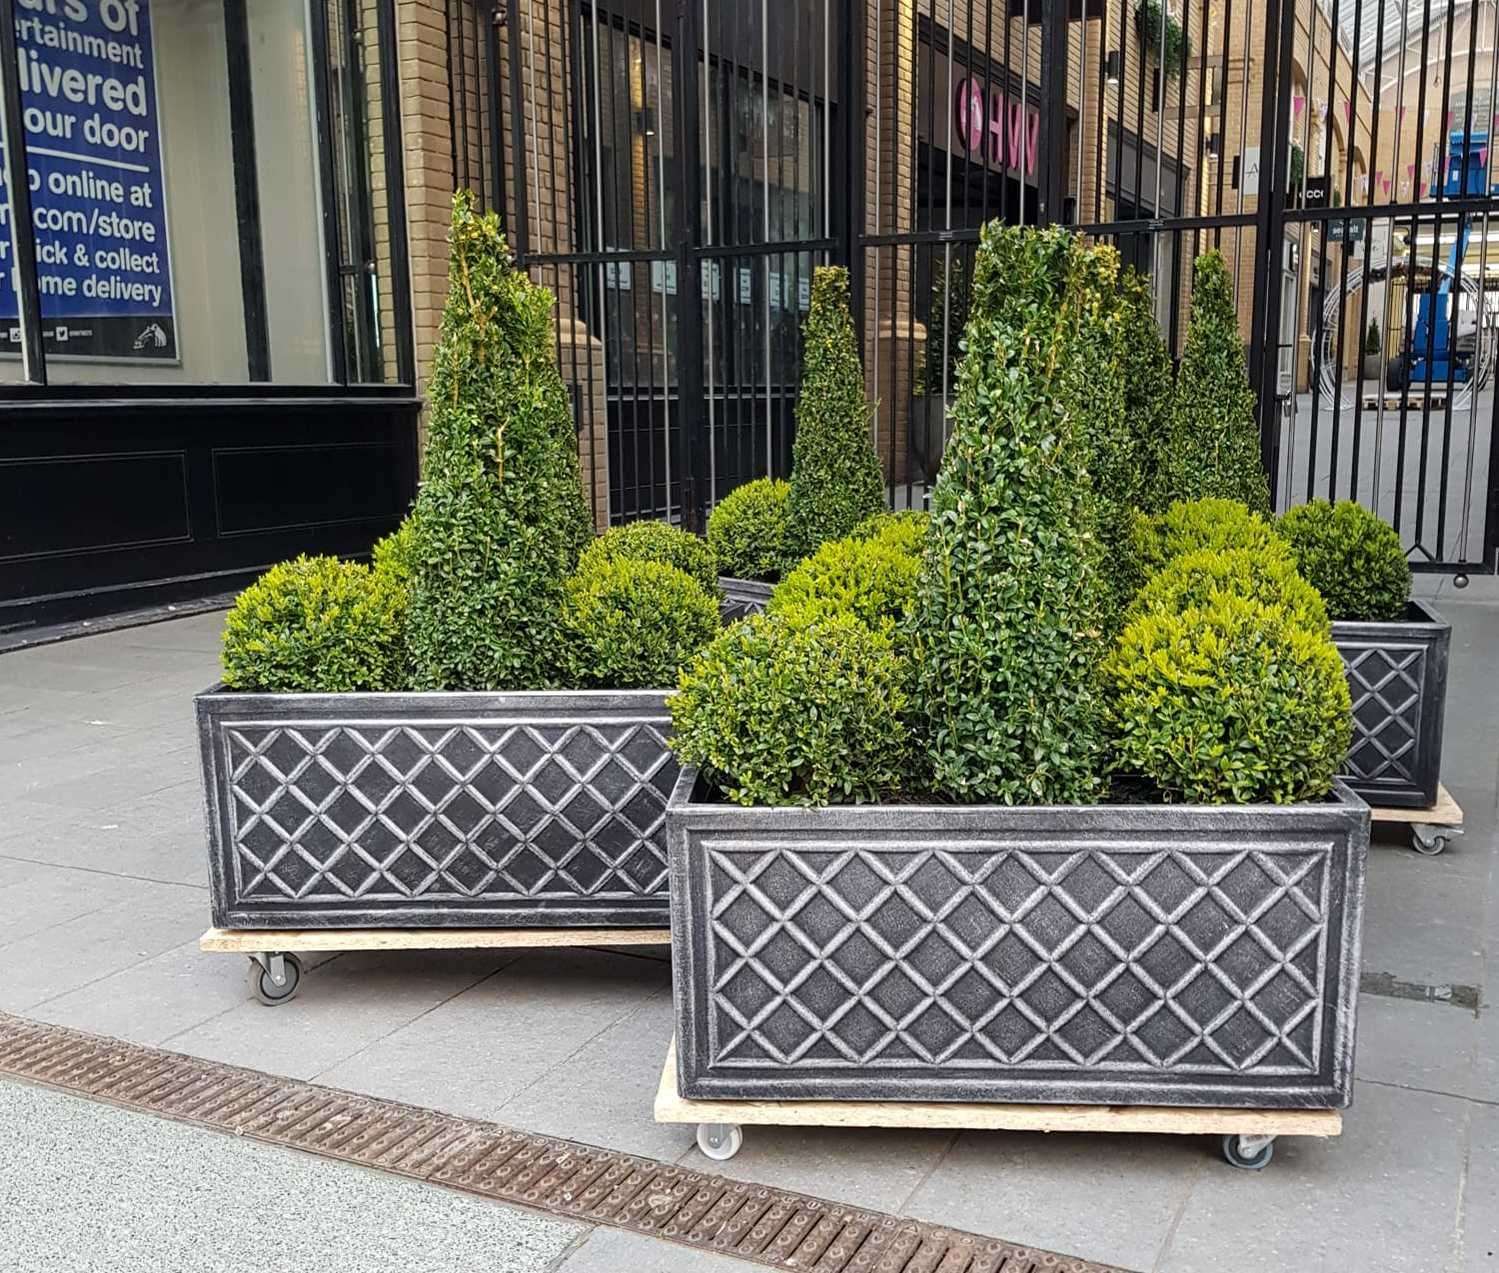 The planters in their former glory. Picture: Ann-Marie Bundock